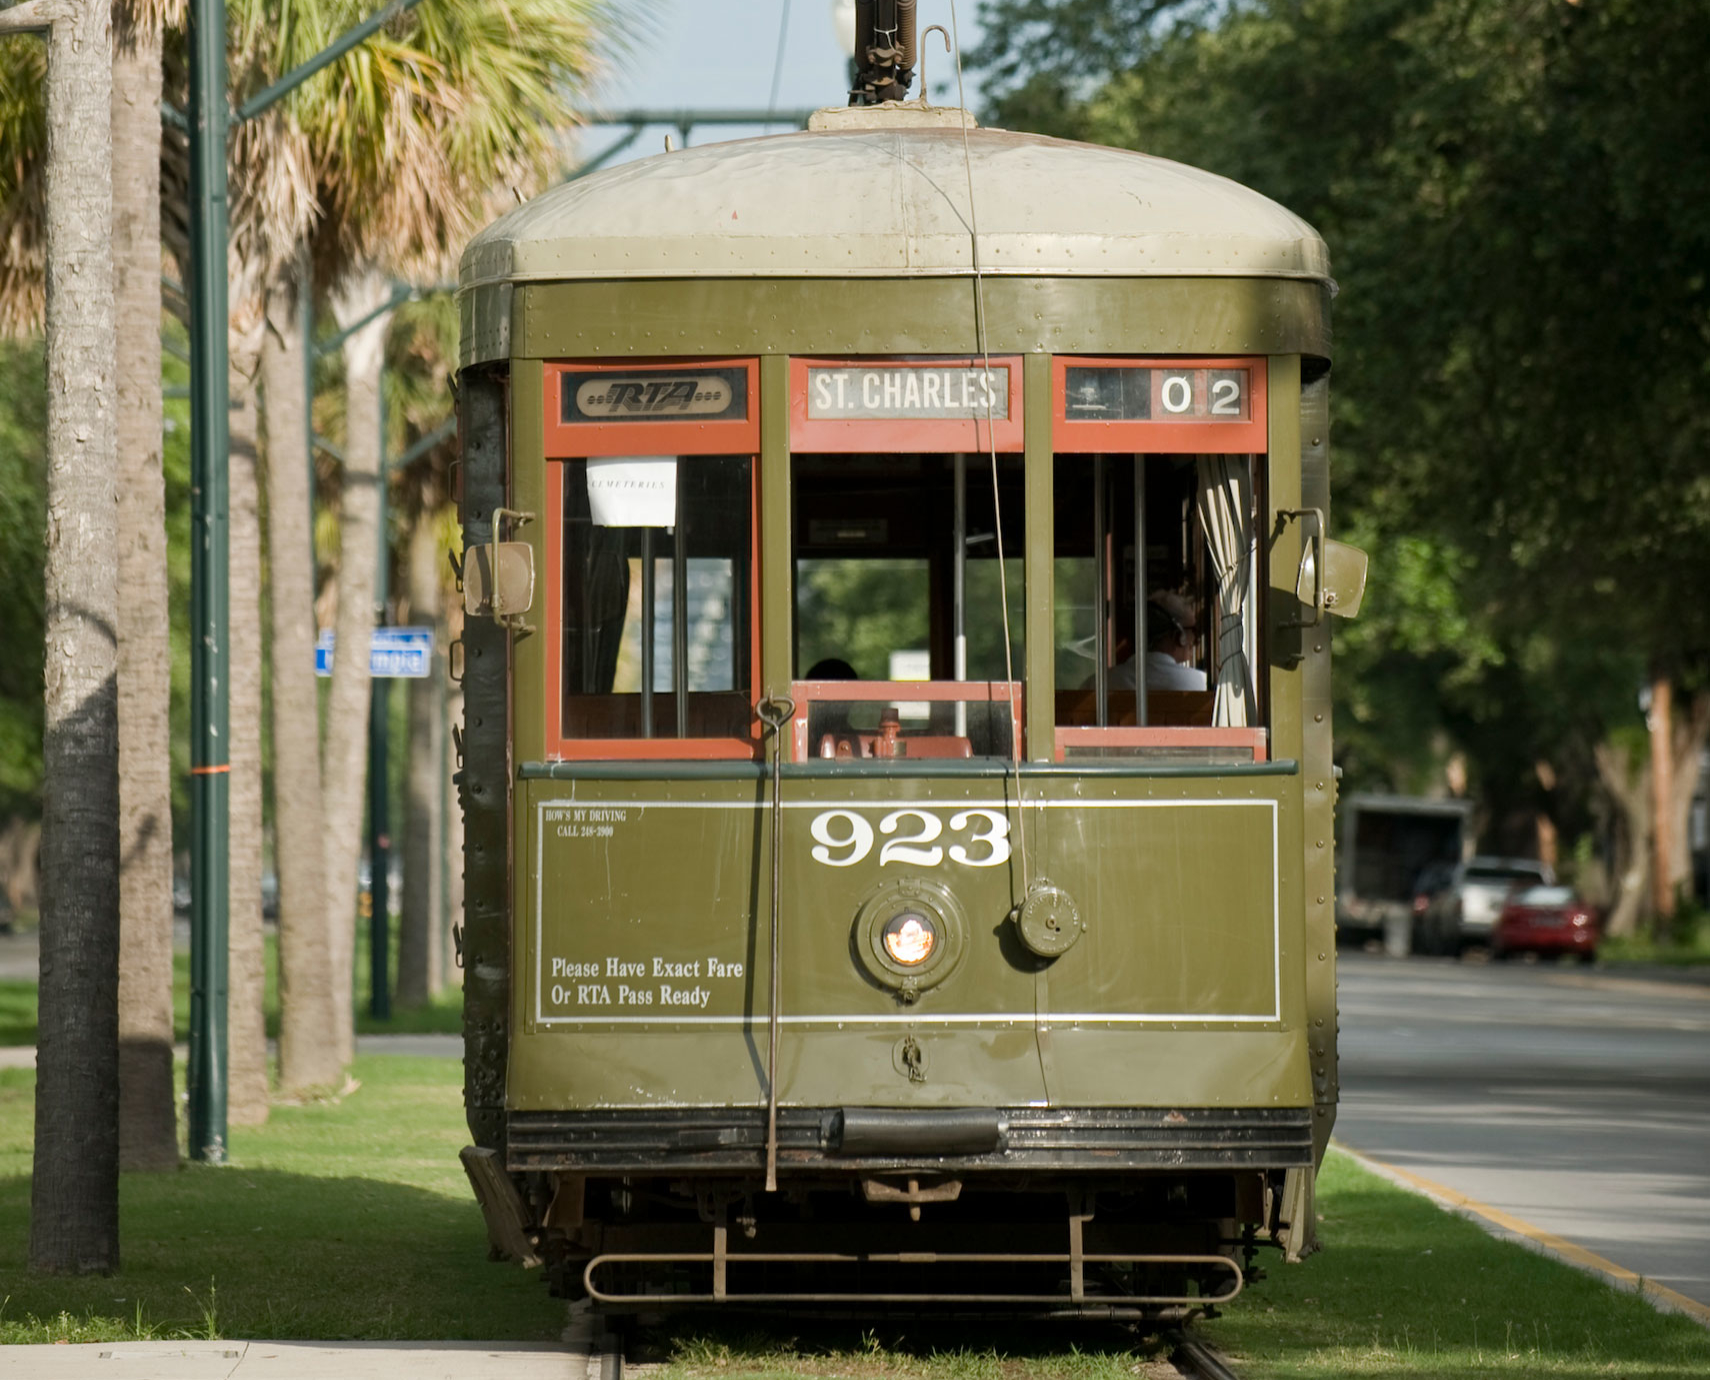 Trolly car in the city